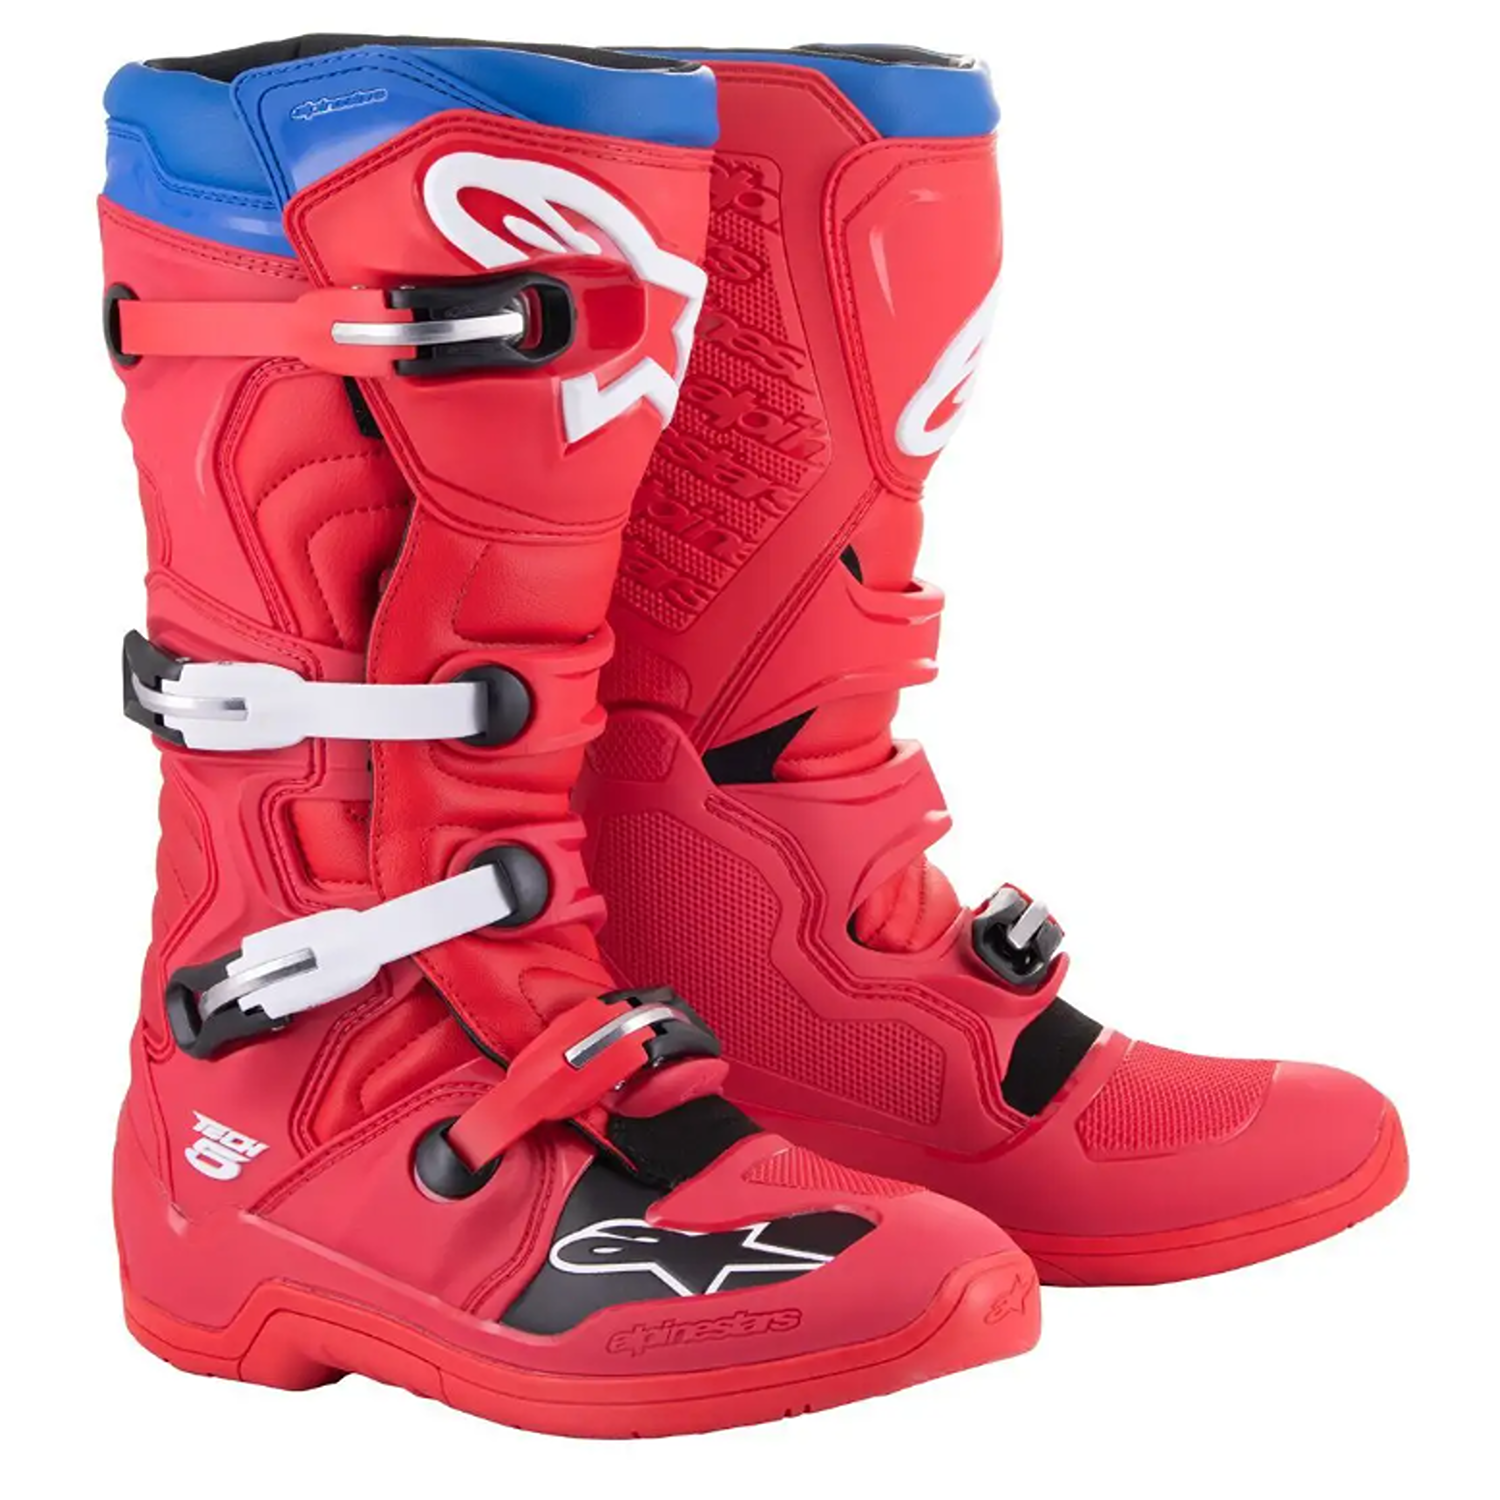 Image of Alpinestars Tech 5 Boots Bright Red Dark Red Blue Taille US 11